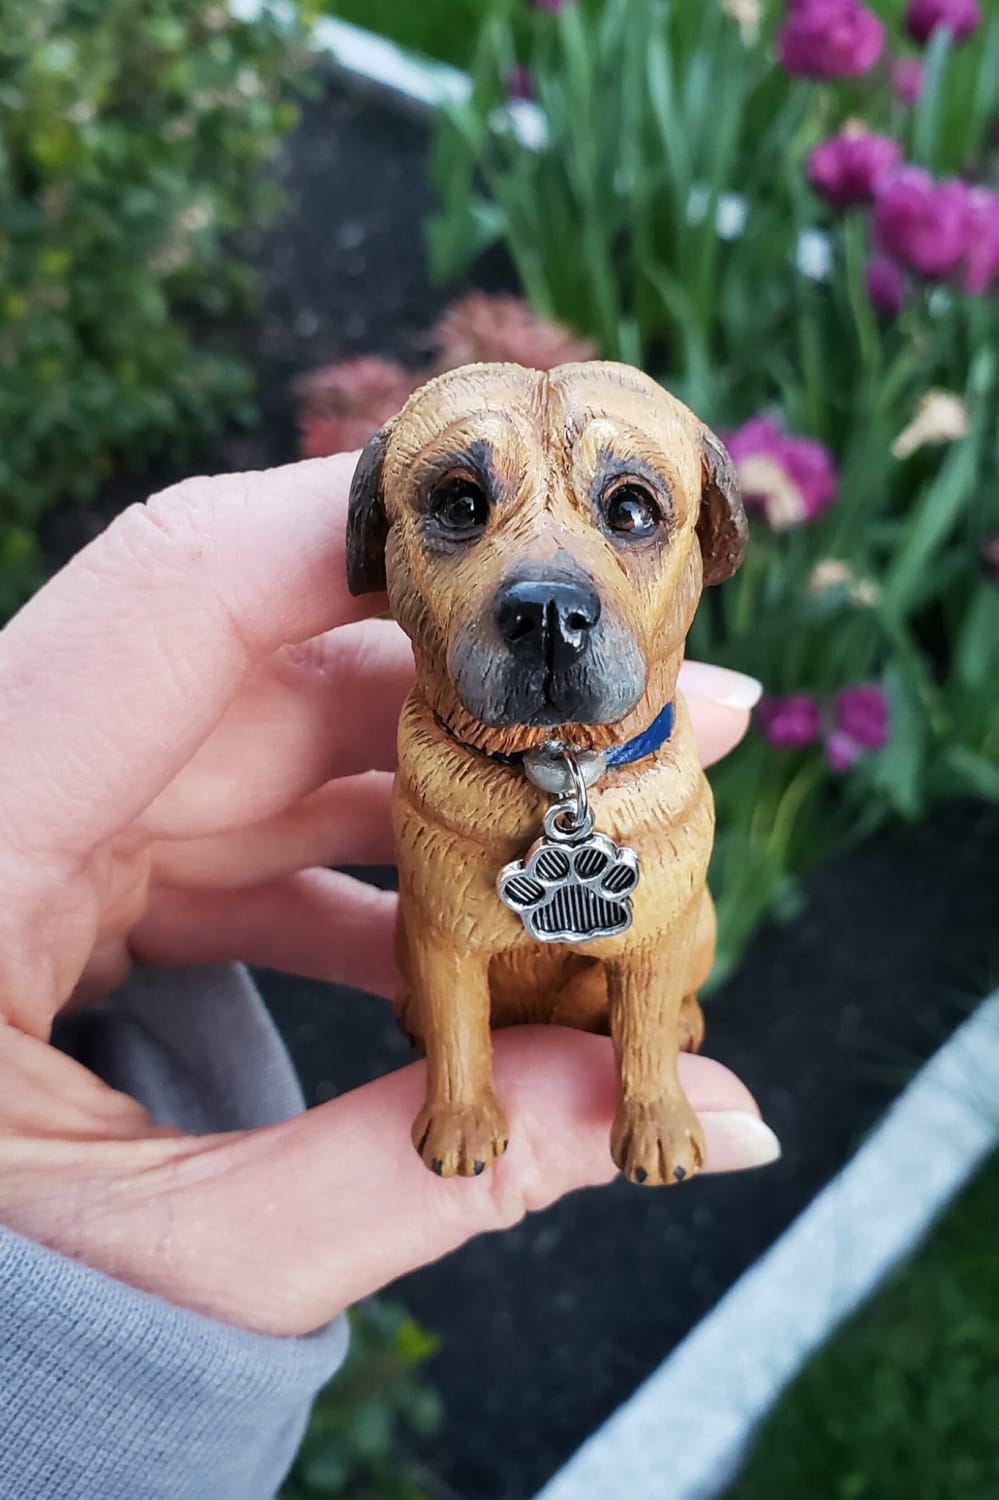 A custom pet sculpture that I made of a cute Rottweiler/Boxer mix, this good boy's name is Ace!